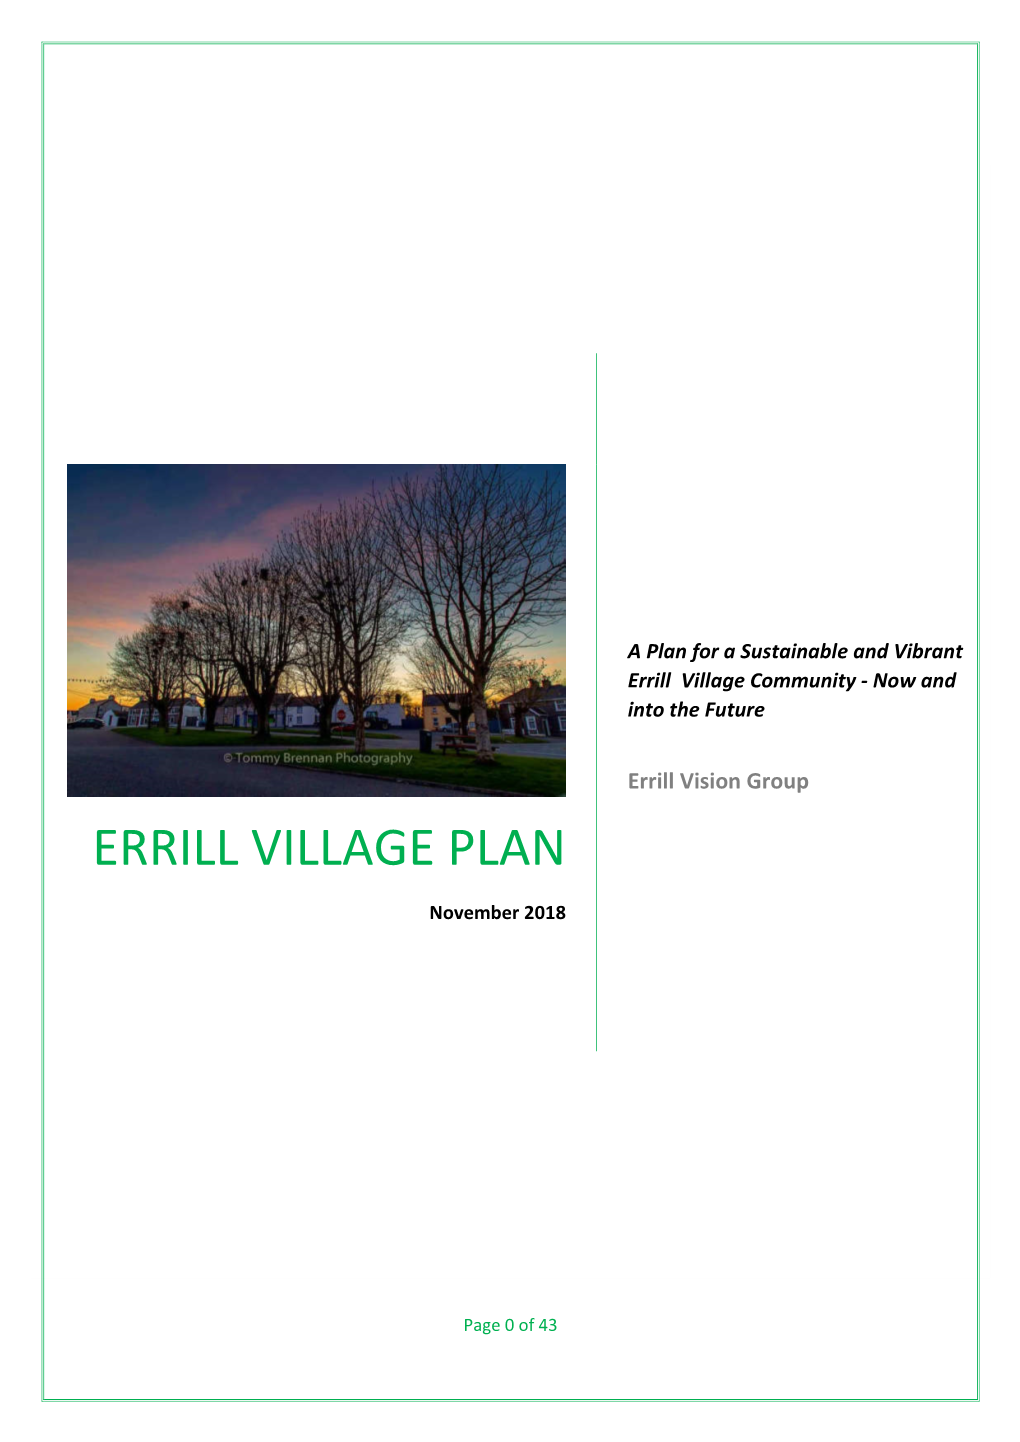 Errill Vision Group Submission